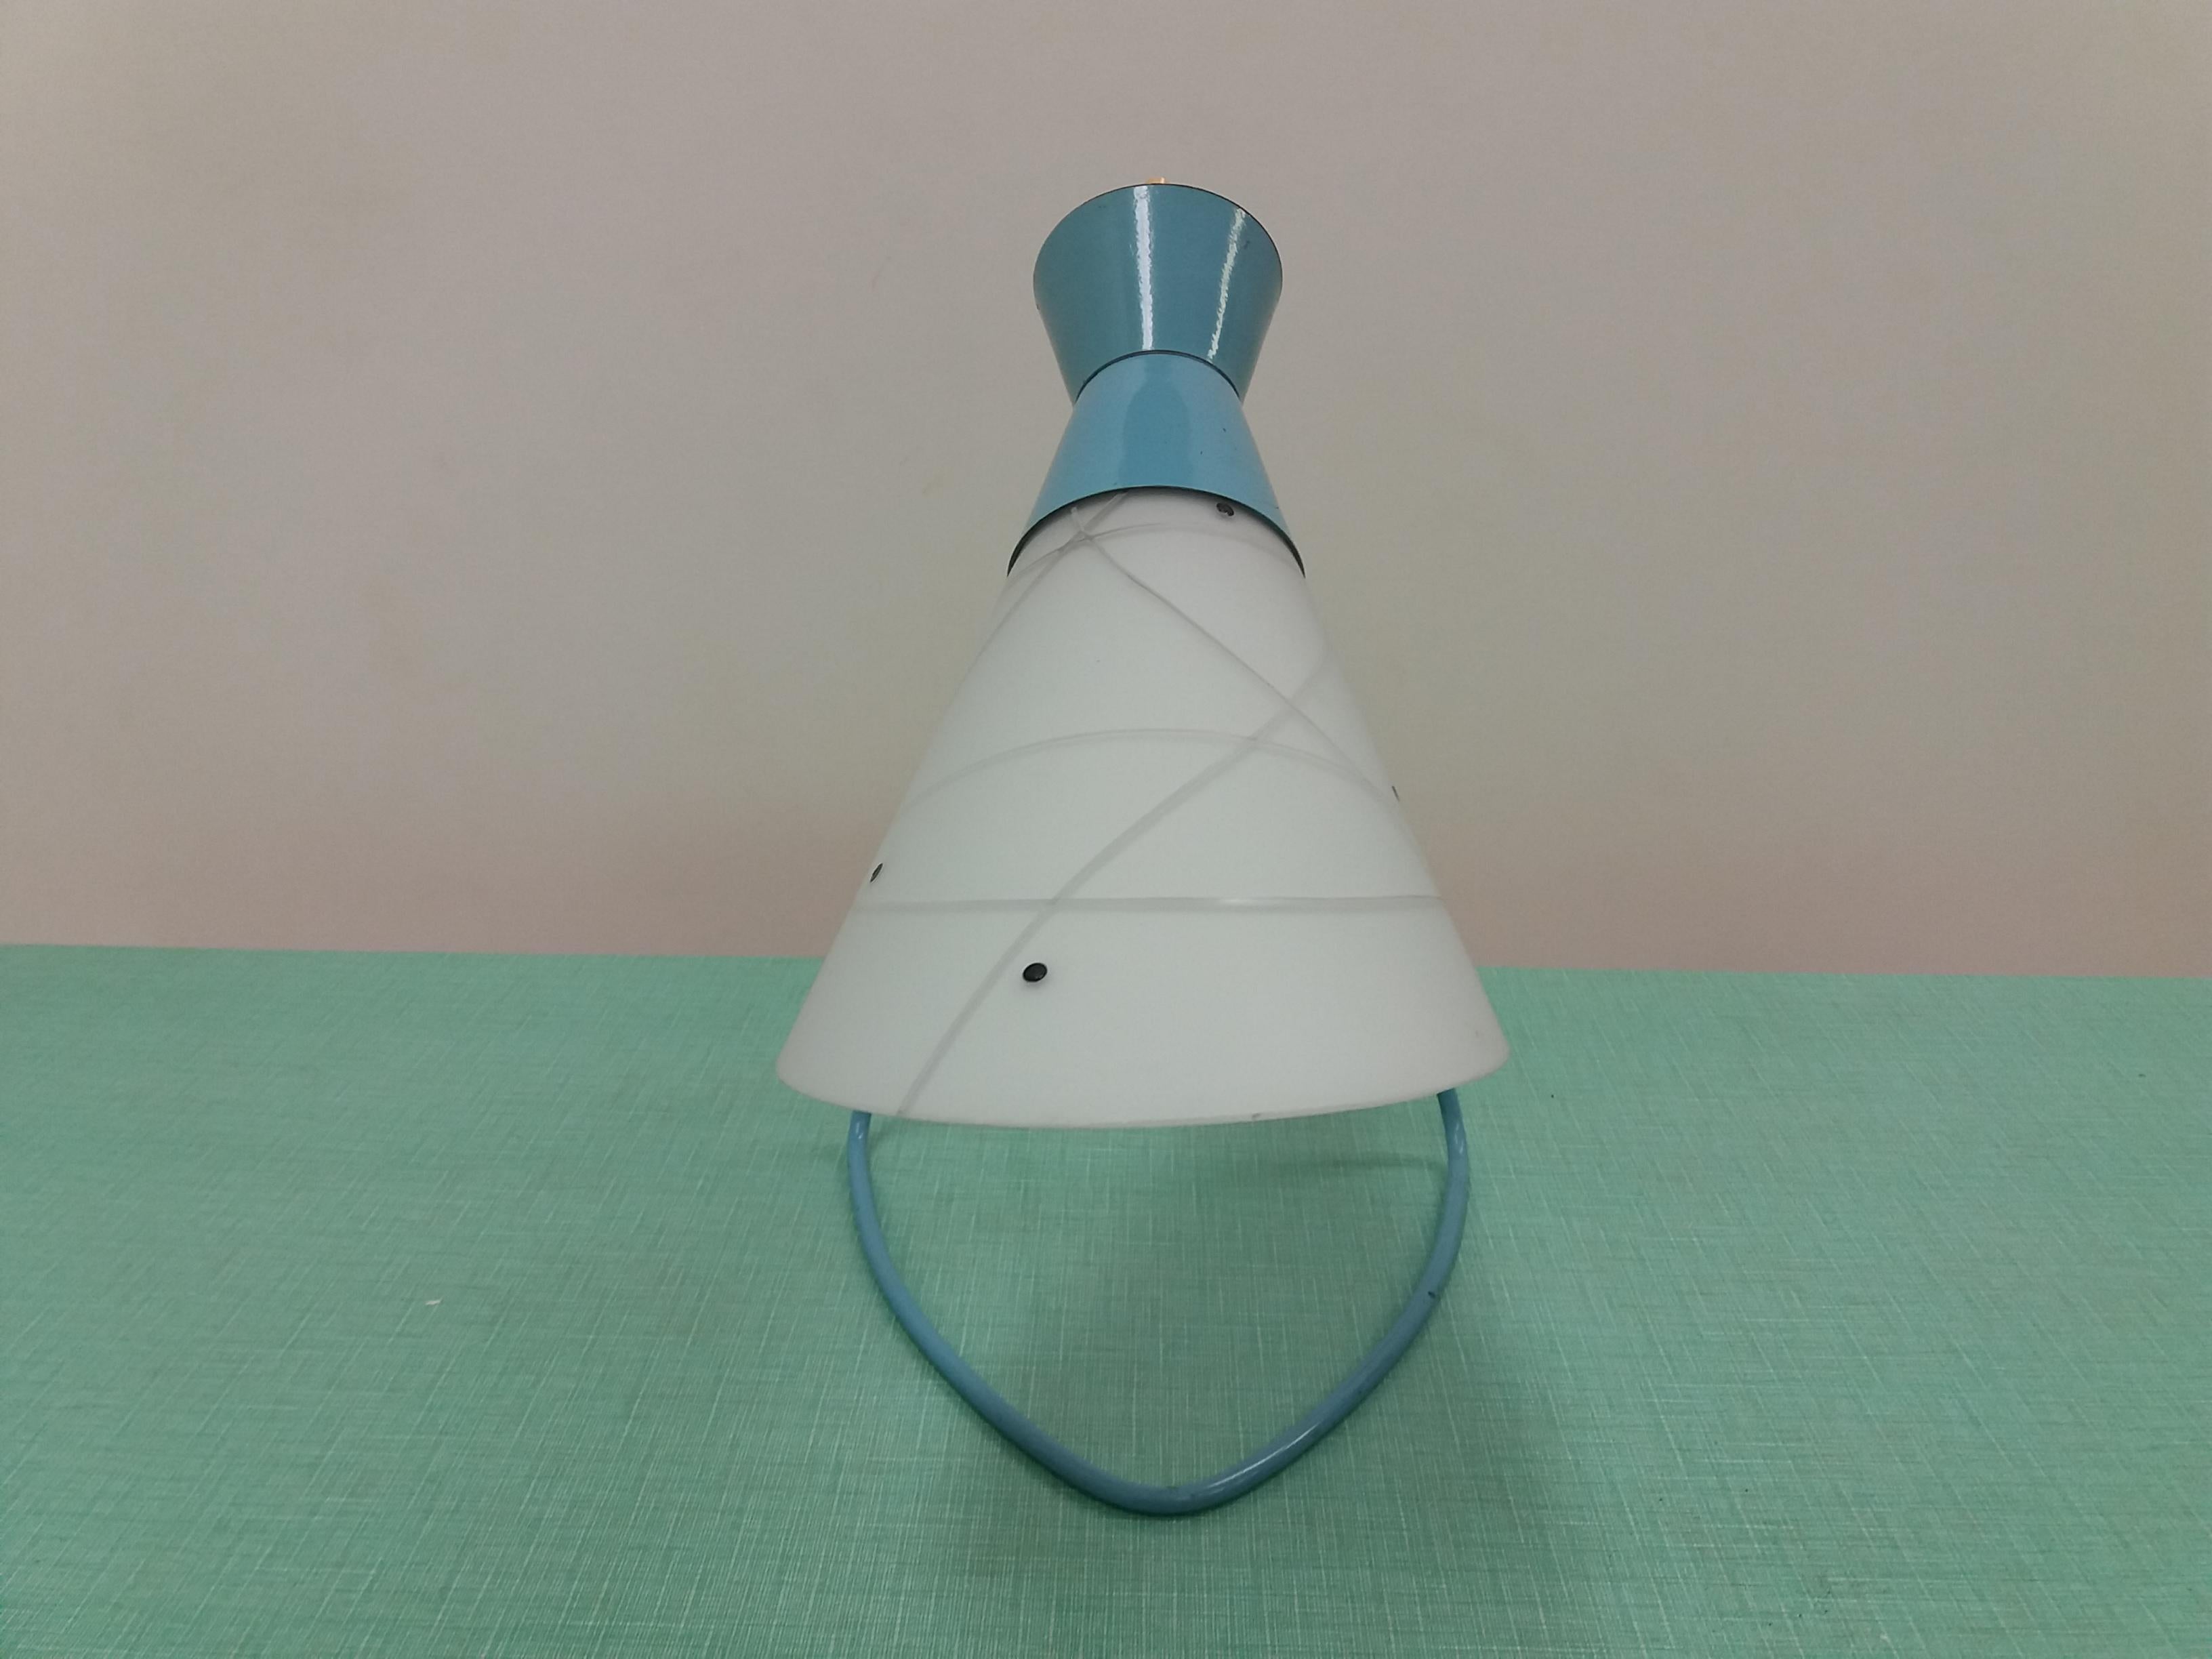 Mid-20th Century Midcentury Table Lamp Designed by Josef Hůrka for Napako, 1958 For Sale